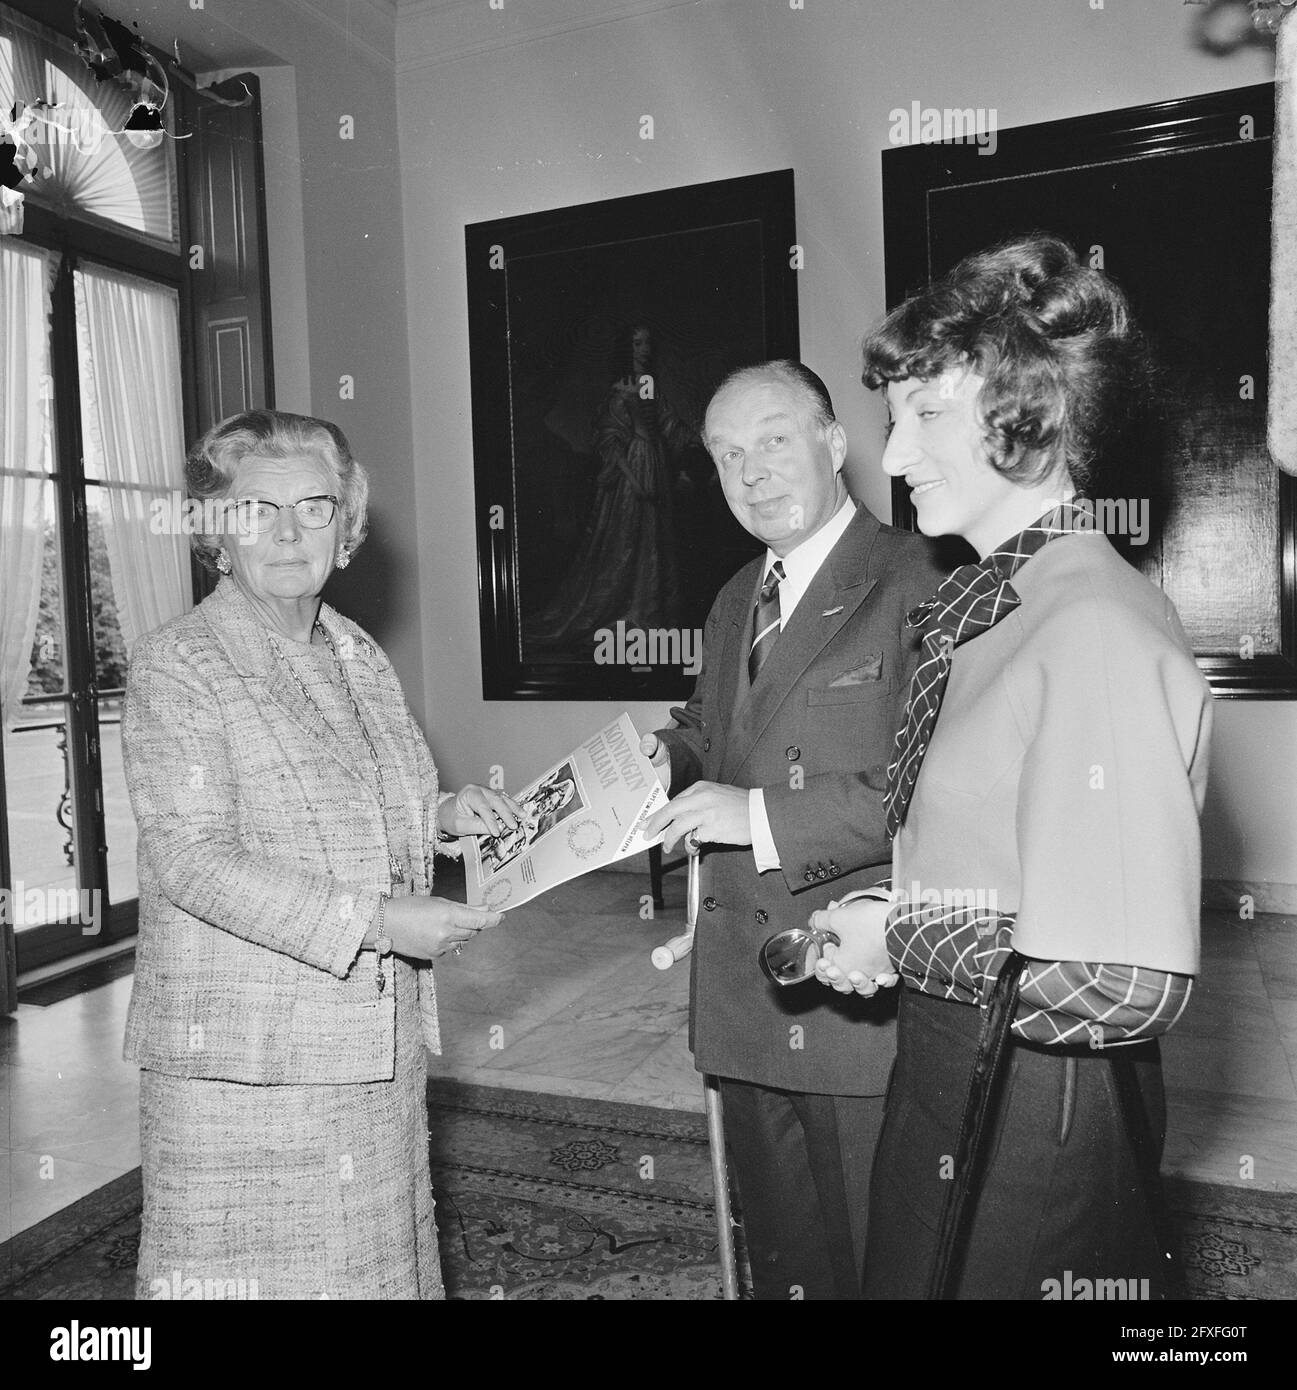 Queen Juliet receives first copy Queen Juliana 1925-1965 from hands of G. Krayenhoff. The Queen and Krayenhoff with magazine., Krayenhoff and Mirjam J. [text broken off], September 13, 1973, copies, queens, receptions, The Netherlands, 20th century press agency photo, news to remember, documentary, historic photography 1945-1990, visual stories, human history of the Twentieth Century, capturing moments in time Stock Photo